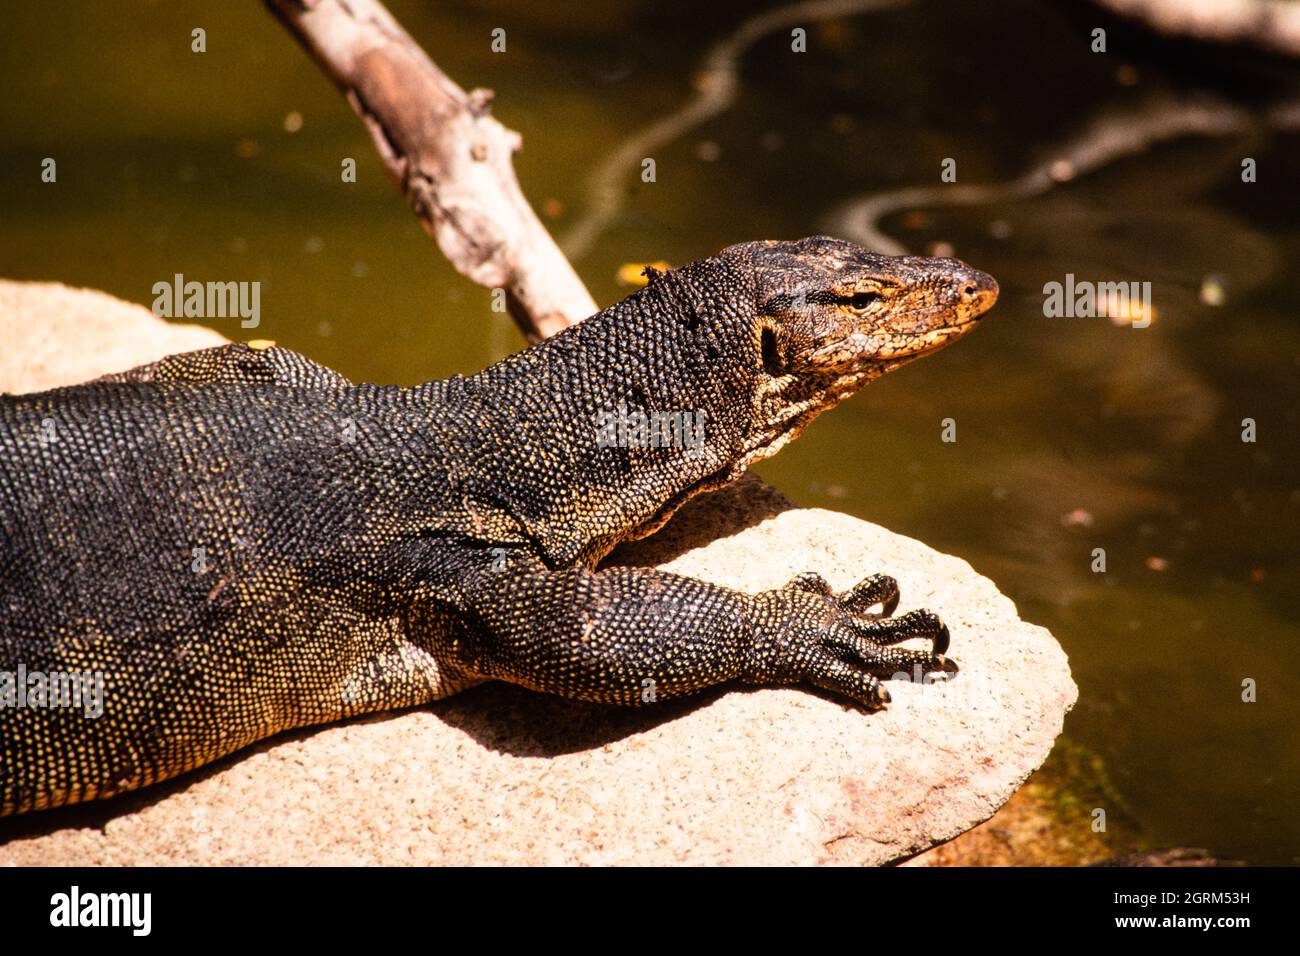 The Asian Water Monitor, Varanus salvator, is a large monitor lizard found in South and Southeast Asia. Stock Photo